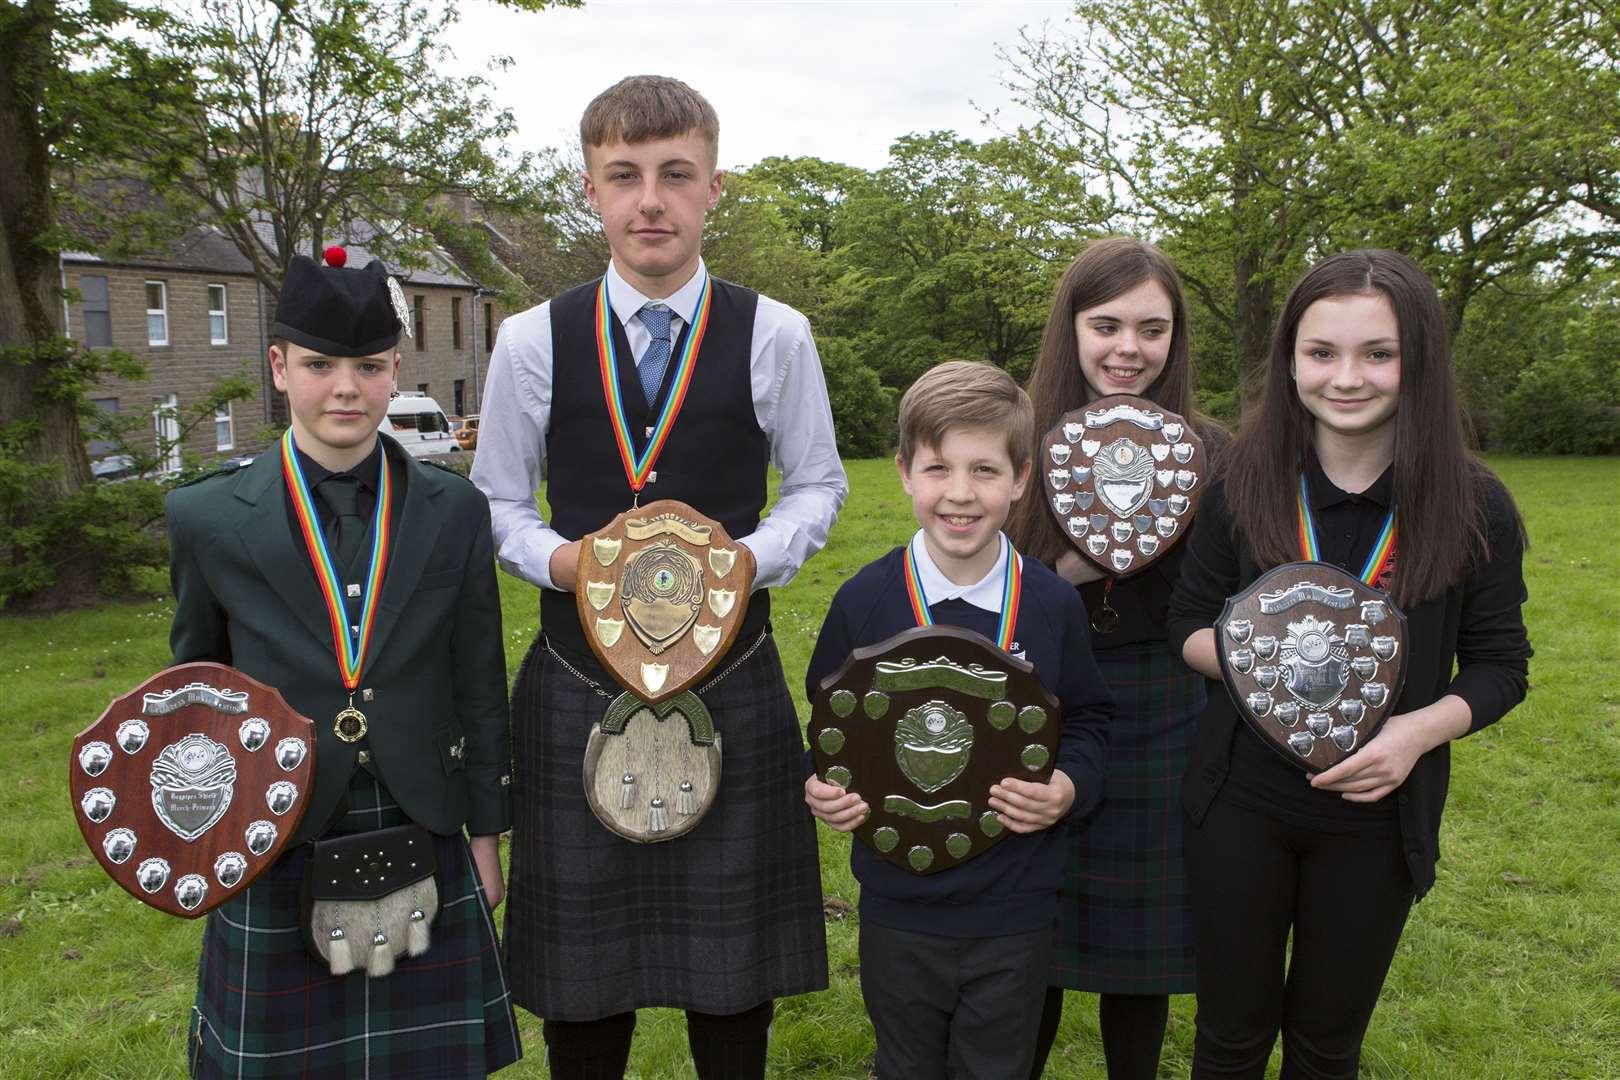 Bagpipe and chanter trophy winners, from left, Glenn Miller, Watten, won the Bagpipes Shield March Primary, Camie Clark, Barrock, Bagpipes Shield Strathspey and Reel, Andrew Sinclair, Latheron, Practice Chanter Shield Primary, Anna McGee, Bettyhill, Piping Challenge Shield March, and Louisa Donn, Thurso, Practice Chanter Shield Secondary. Picture: Robert MacDonald / Northern Studios